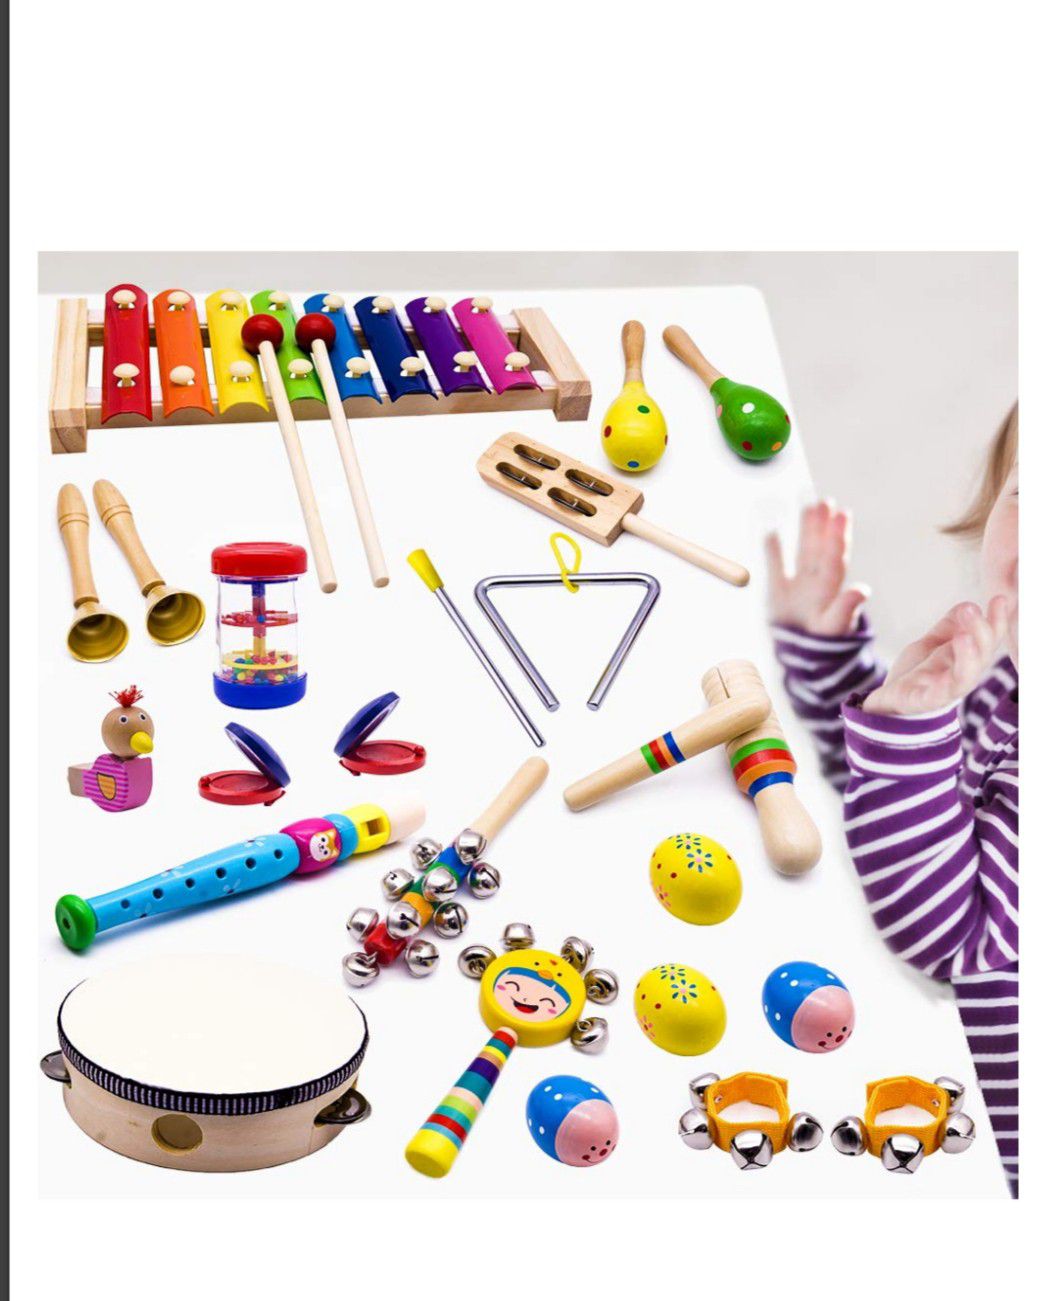 TOYS Kids Musical Instruments, 15 Types 22pcs Wood Percussion Xylophone Toys for Boys and Girls . Great gift for kids toys opened